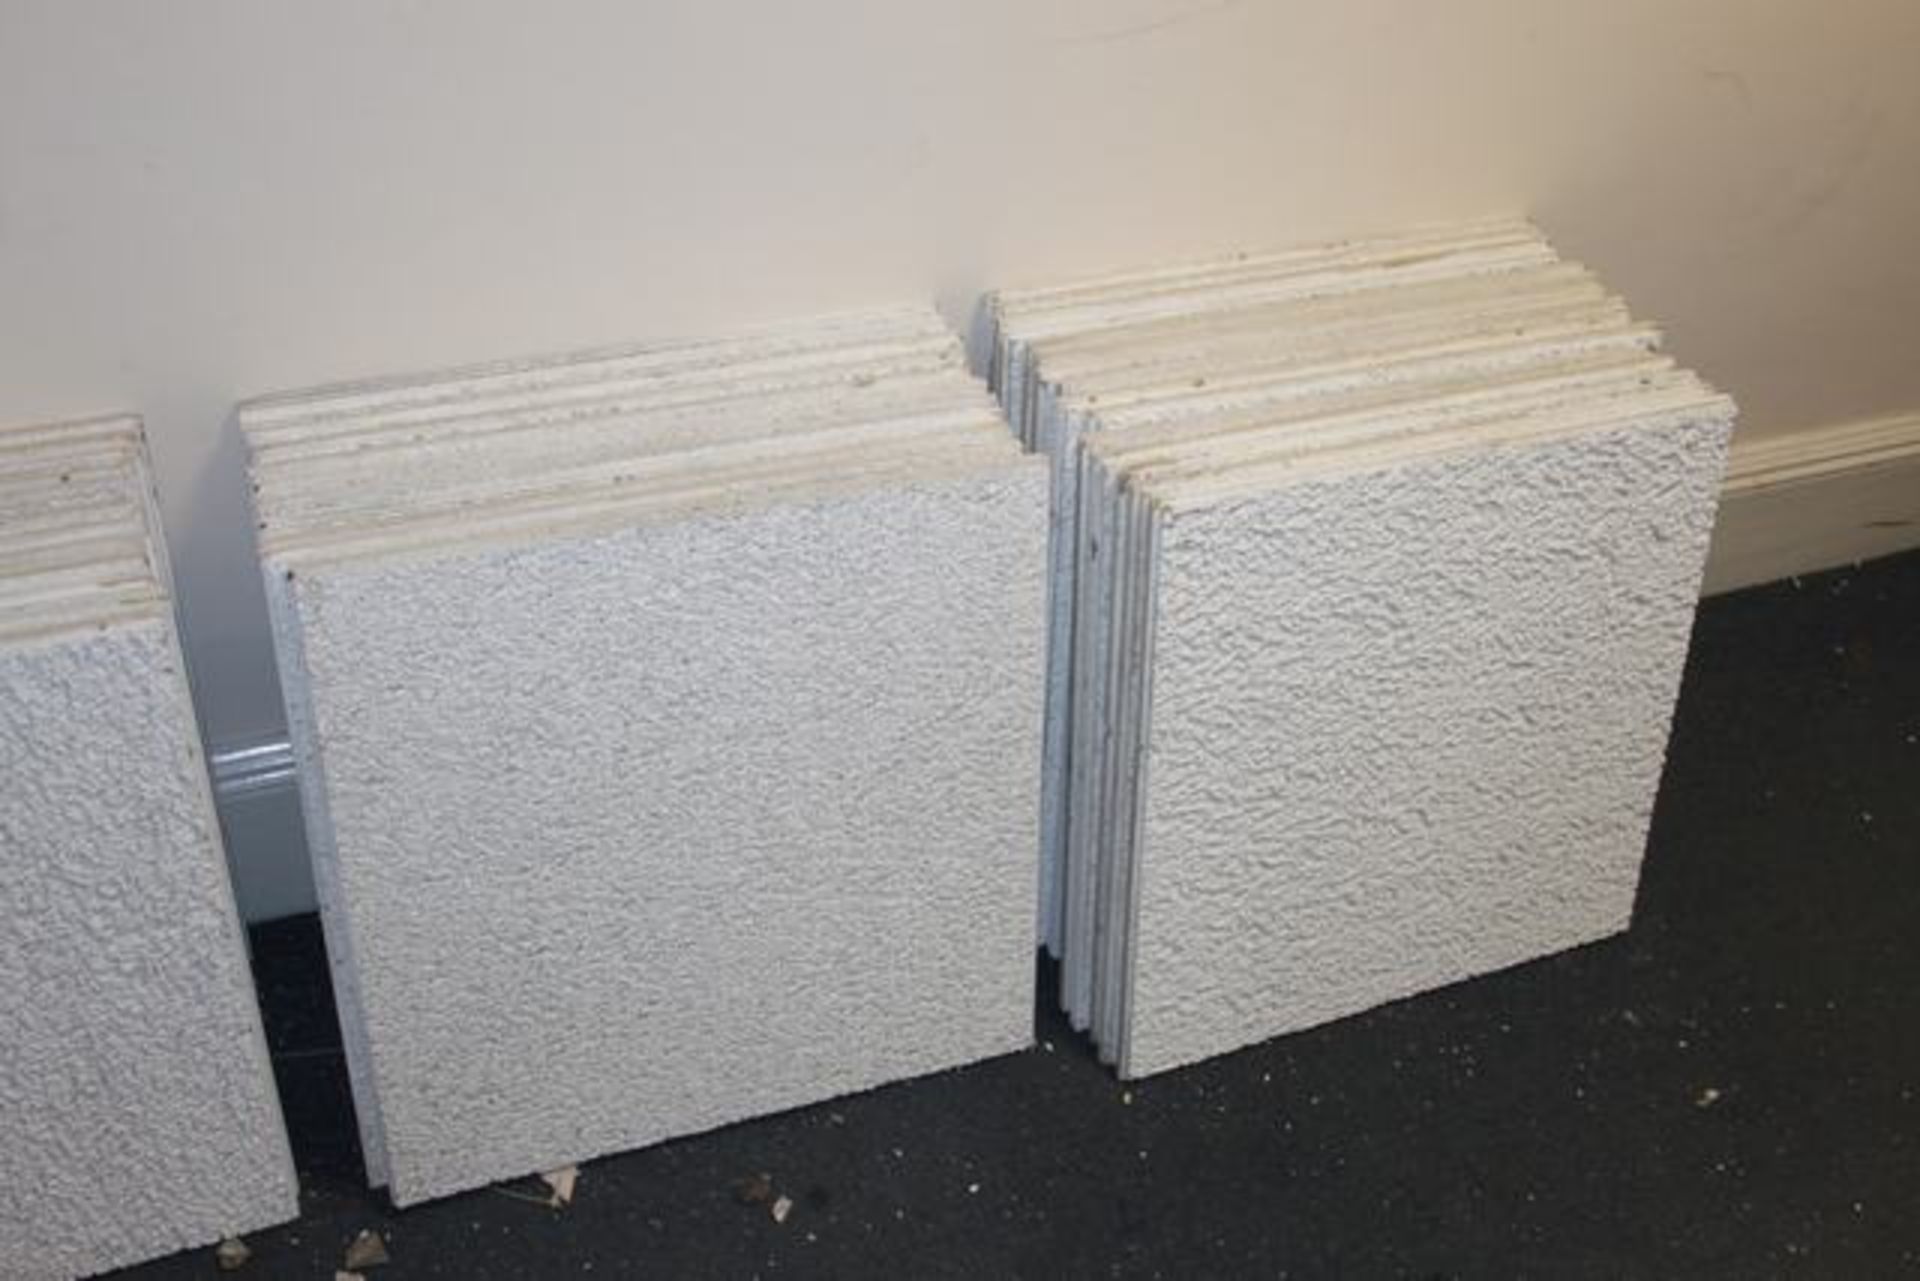 Approximately 1250 x Armstrong Cortega Tegular ceiling tiles each 580mm x 580mm >>Lift out charge